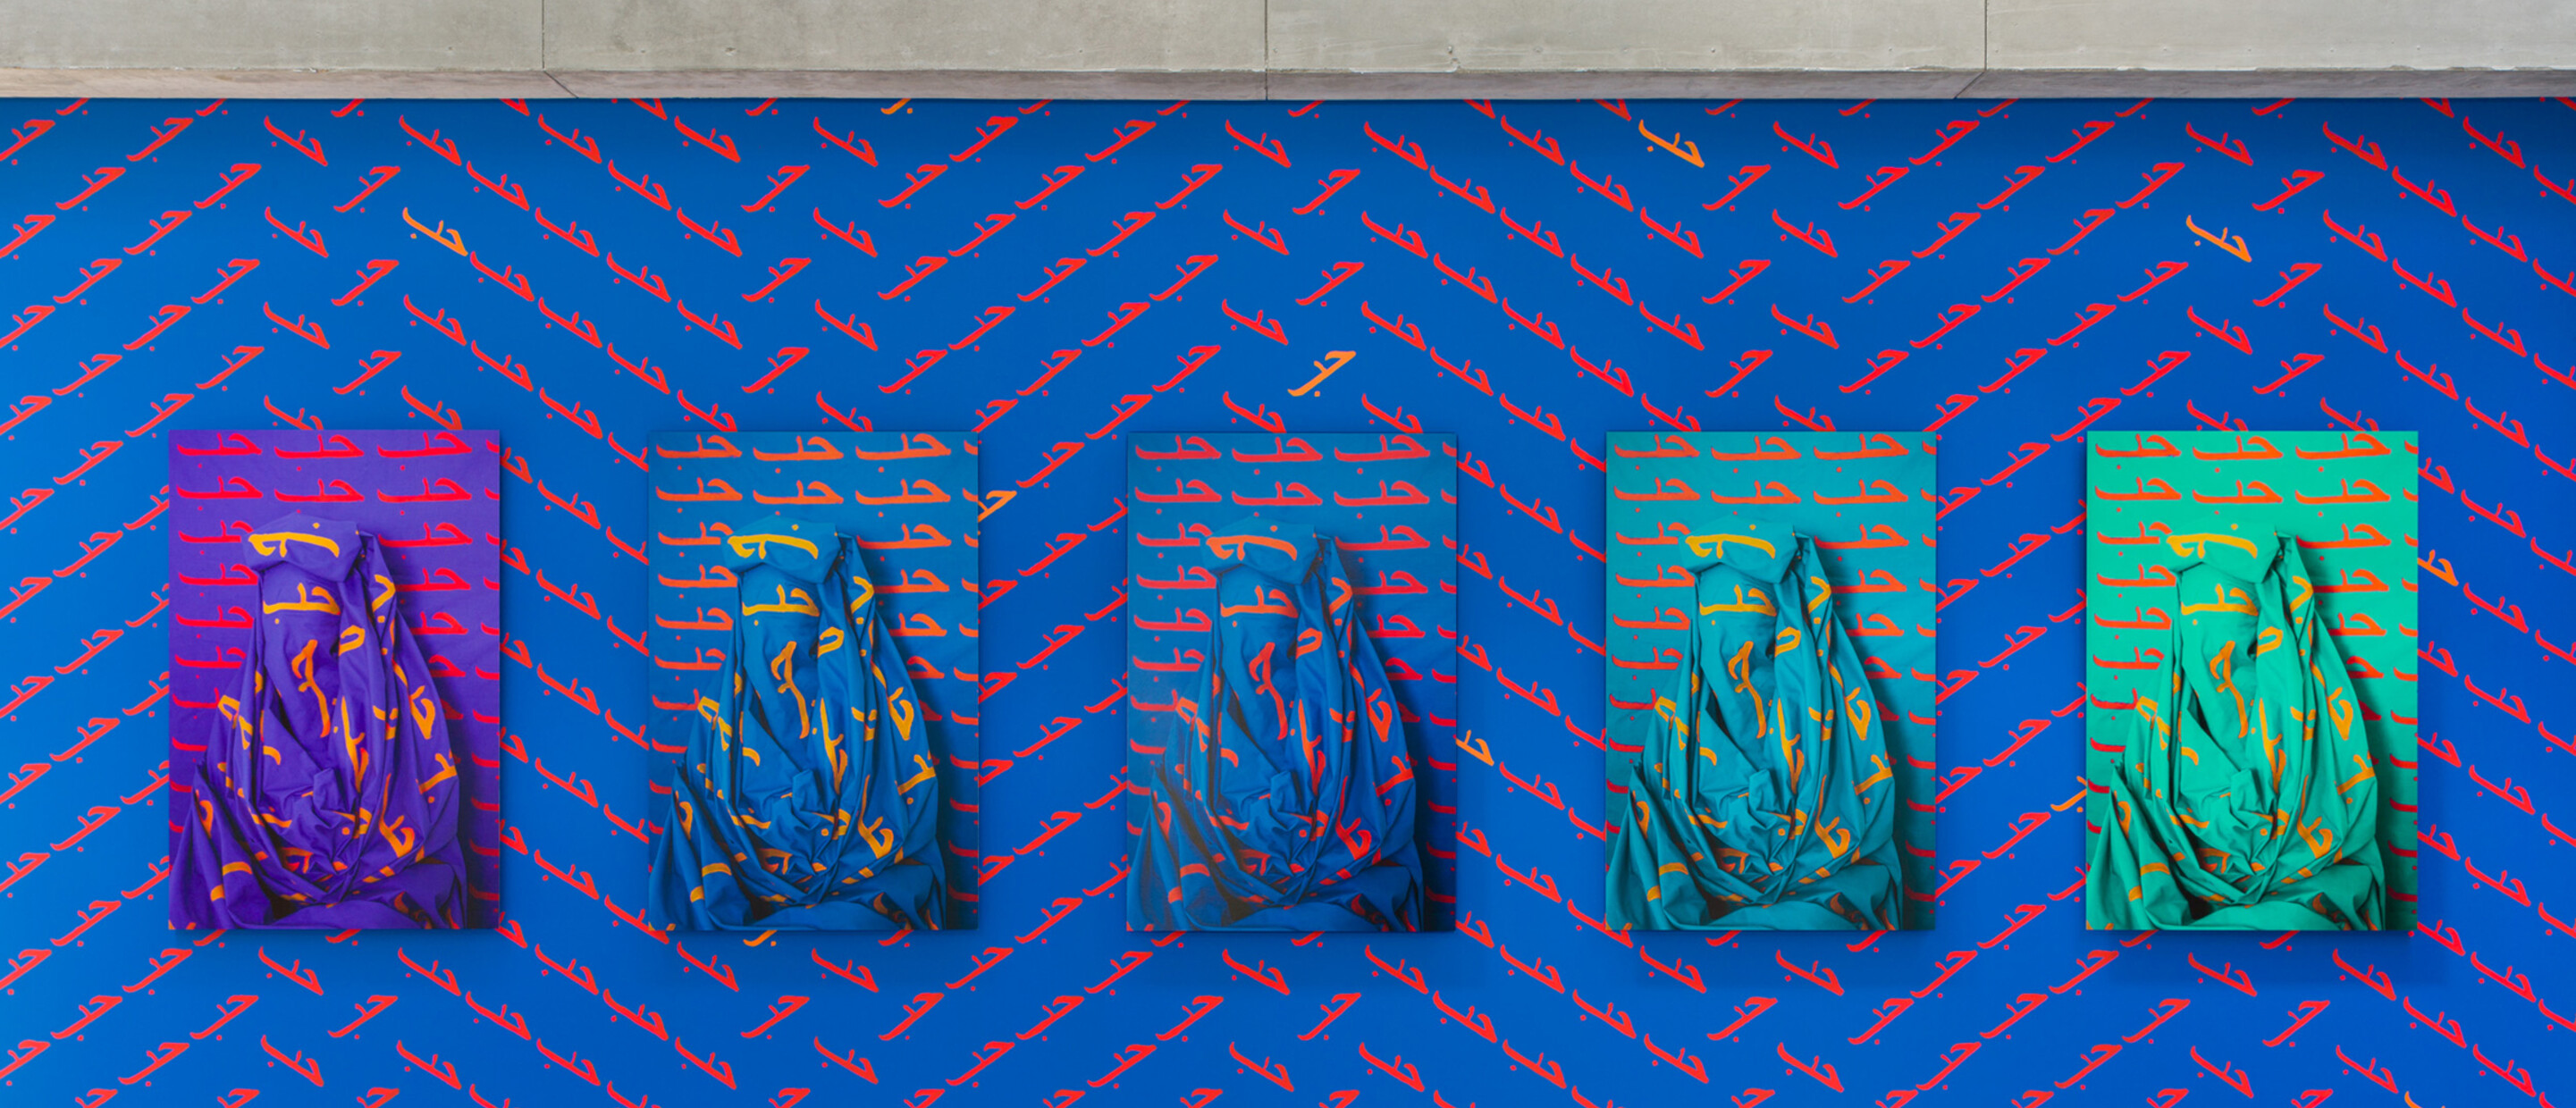 Installation view of Alia Ali's site-specific installation of Love with blue painting wall with Love written repeatedly in Arabic with 5 photographs of figures draped in fabric also with the word Love written in Arabic repeatedly